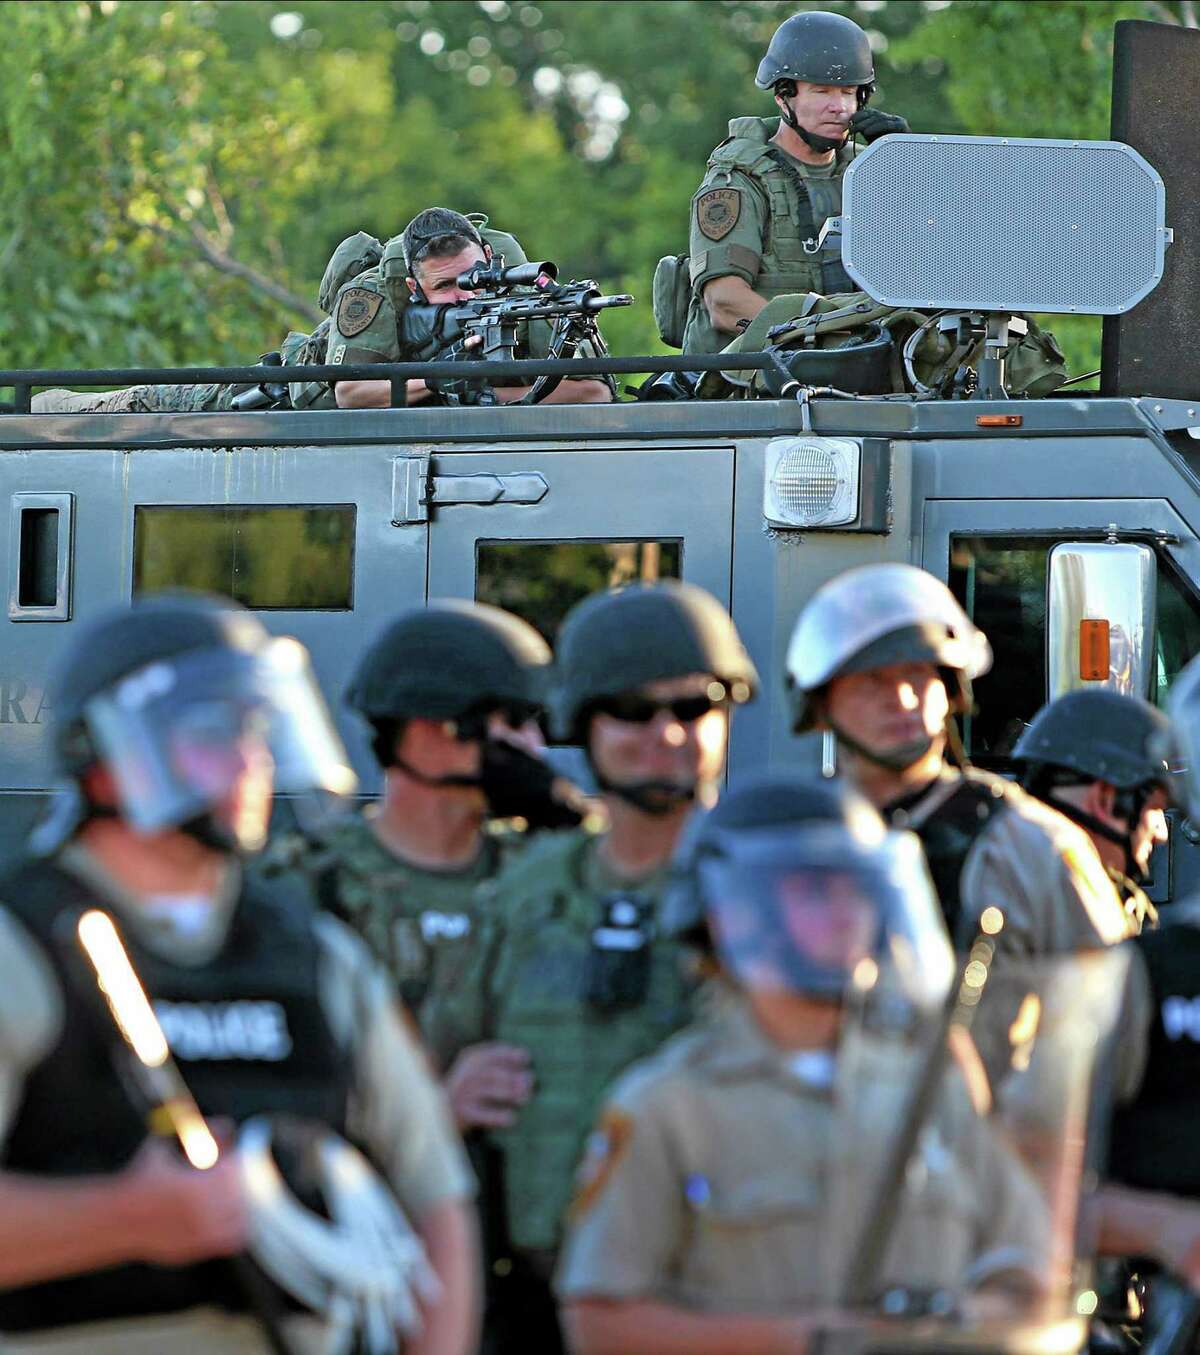 A police sharp shooter keeps an eye on protesters along W. Florissant Avenue on Tuesday, Aug. 12, 2014 near the QuikTrip that was burned down a few days earlier in Ferguson.